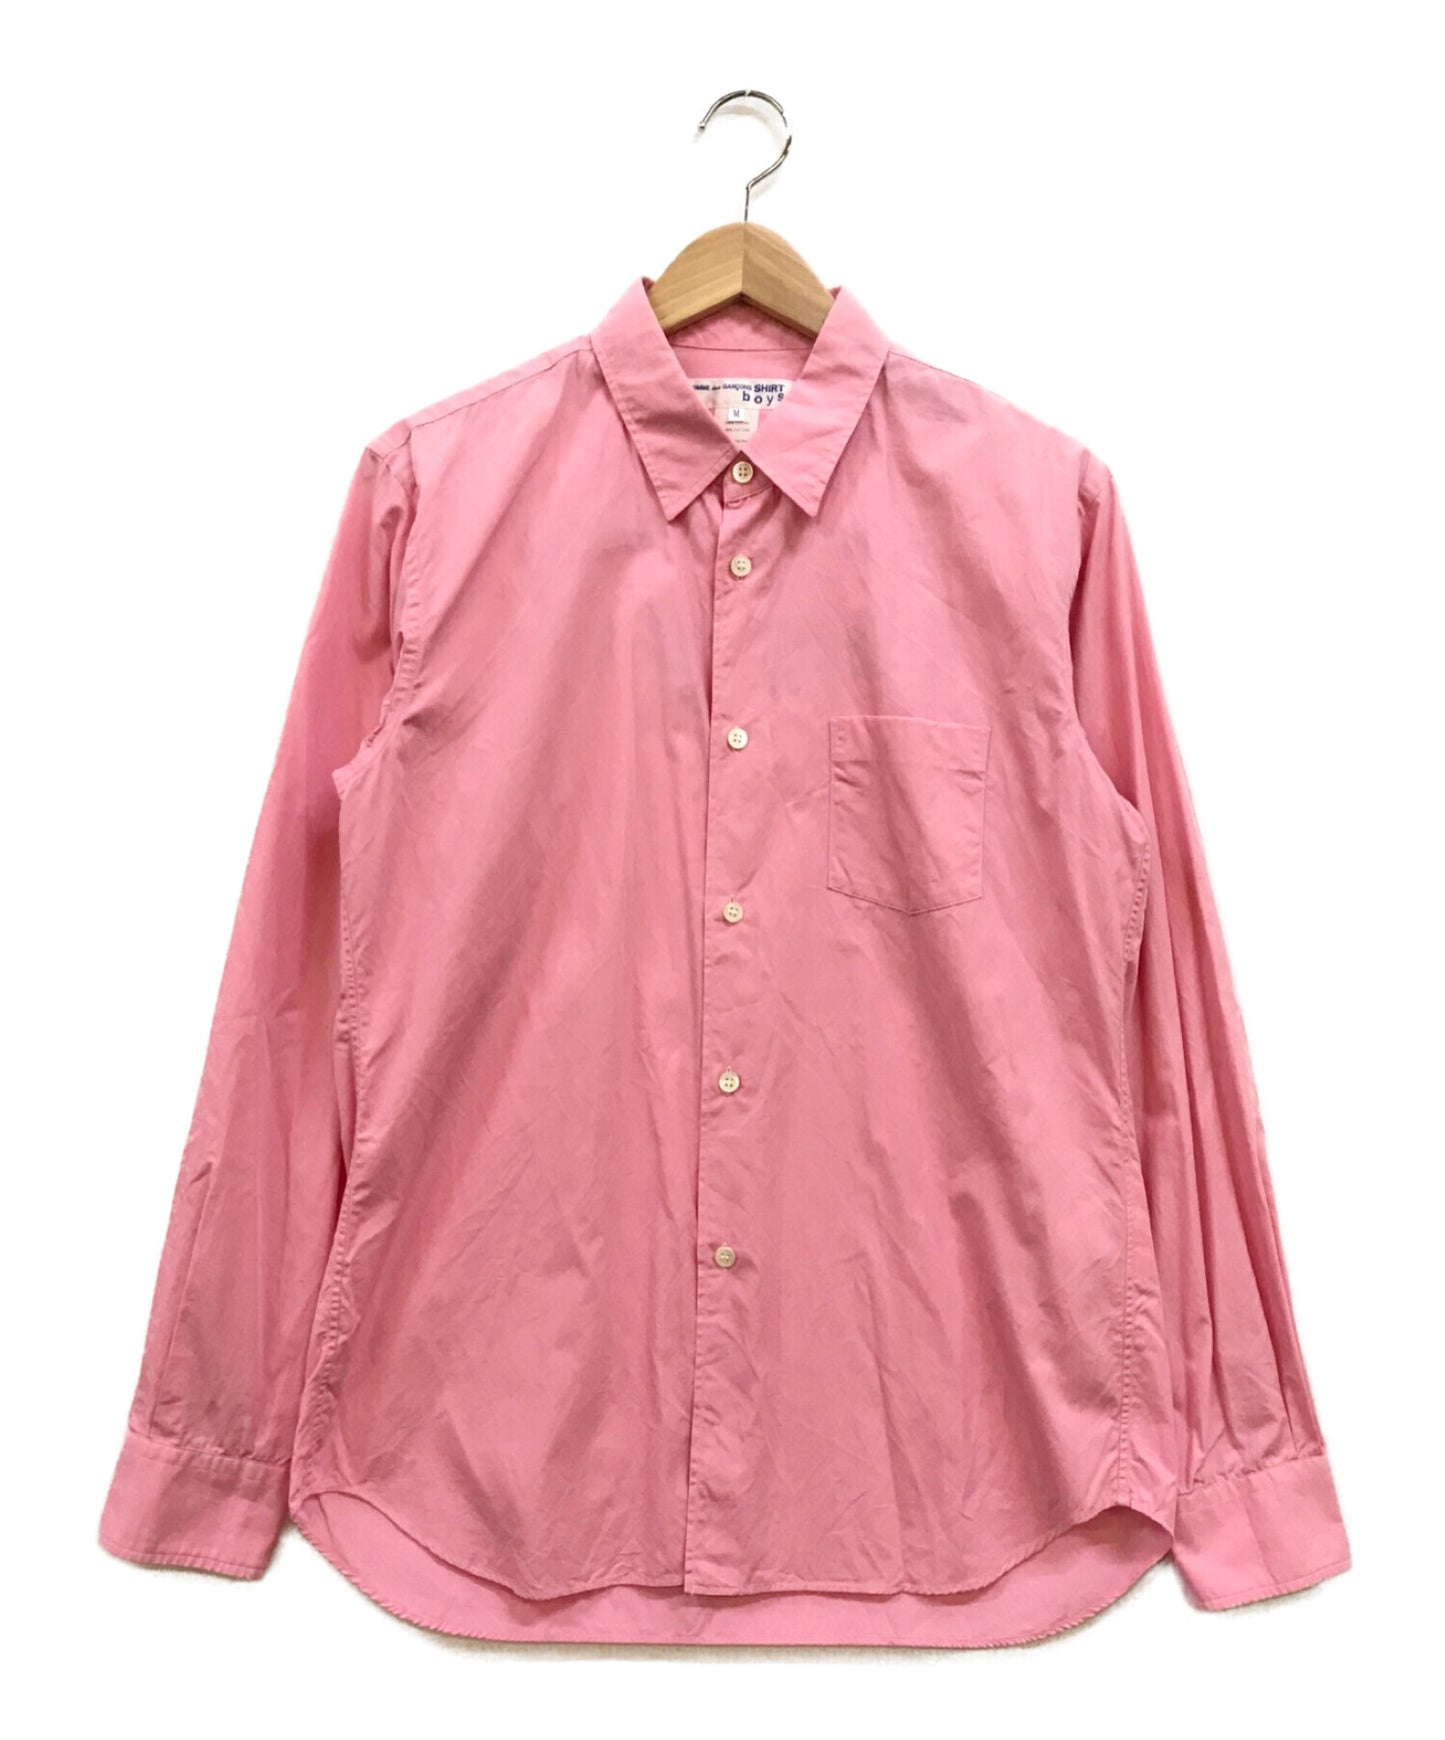 [Pre-owned] COMME des GARCONS SHIRT BOY back printed shirt